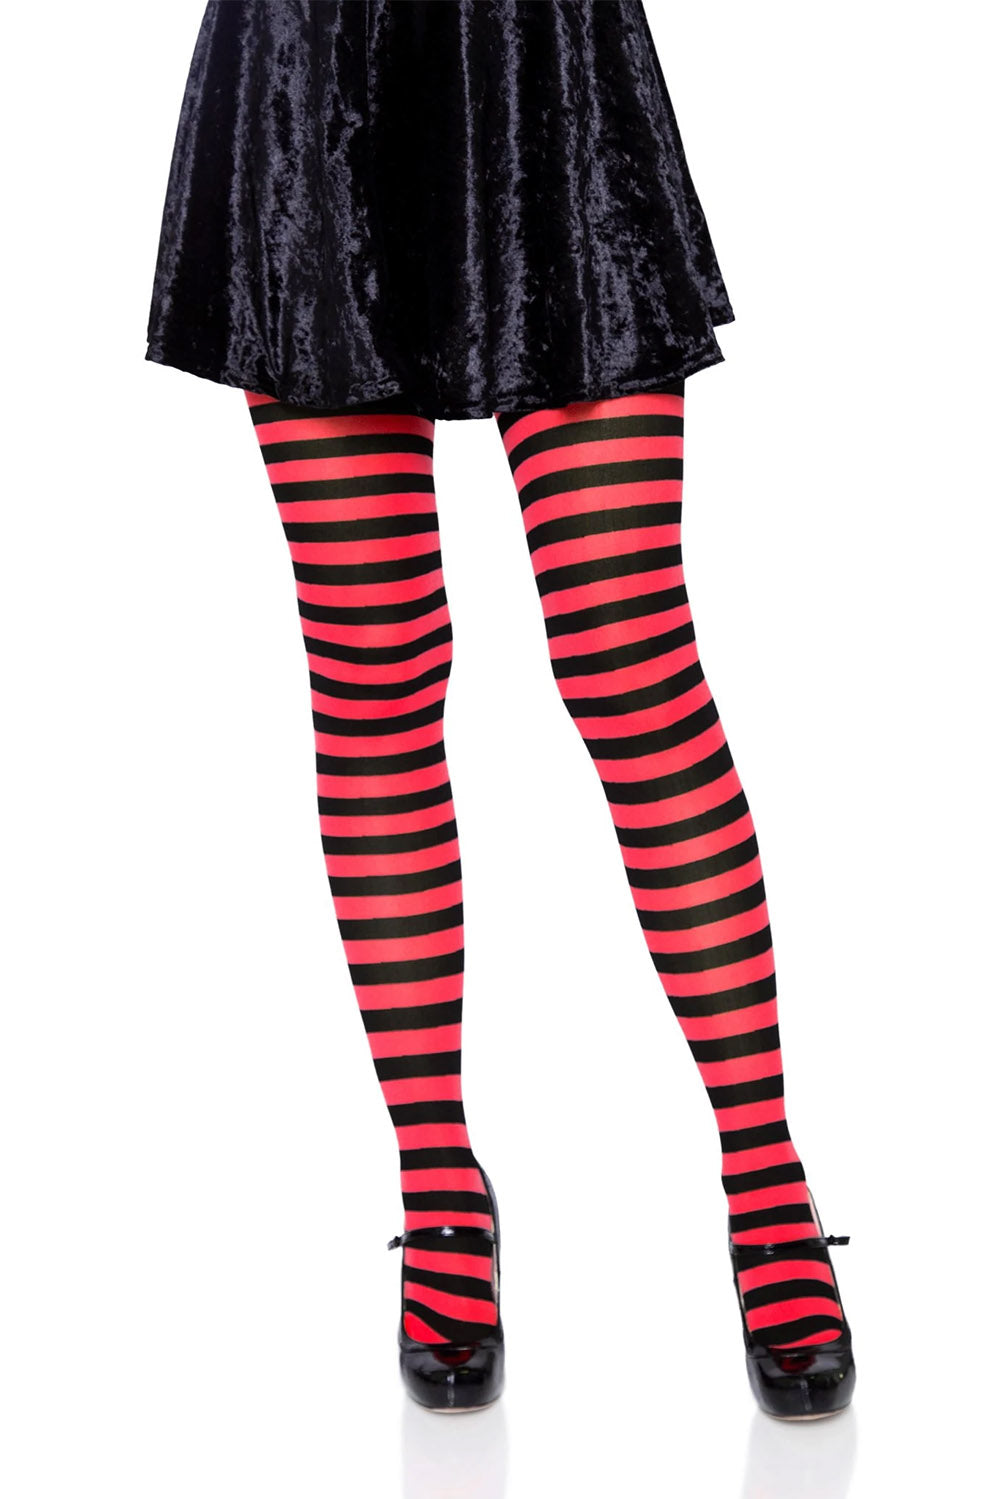 Is That The New Goth 1pair Asymmetrical Striped Tights ??